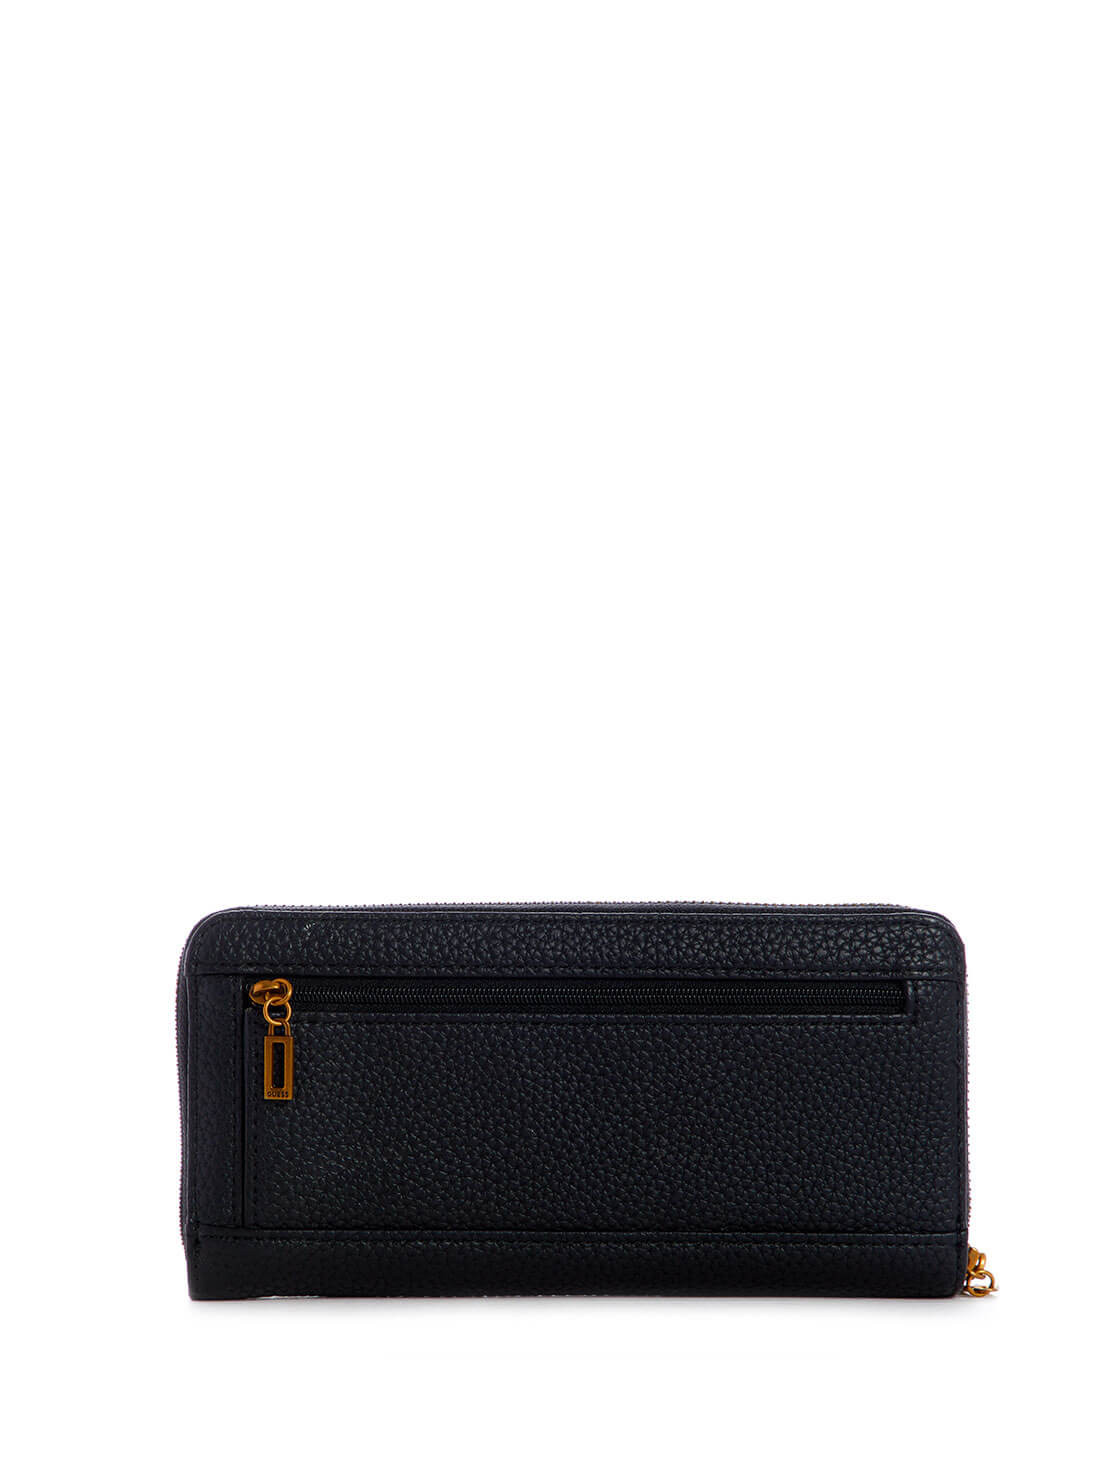 GUESS Womens Black Downtown Chic Large Wallet VB838546 Back View